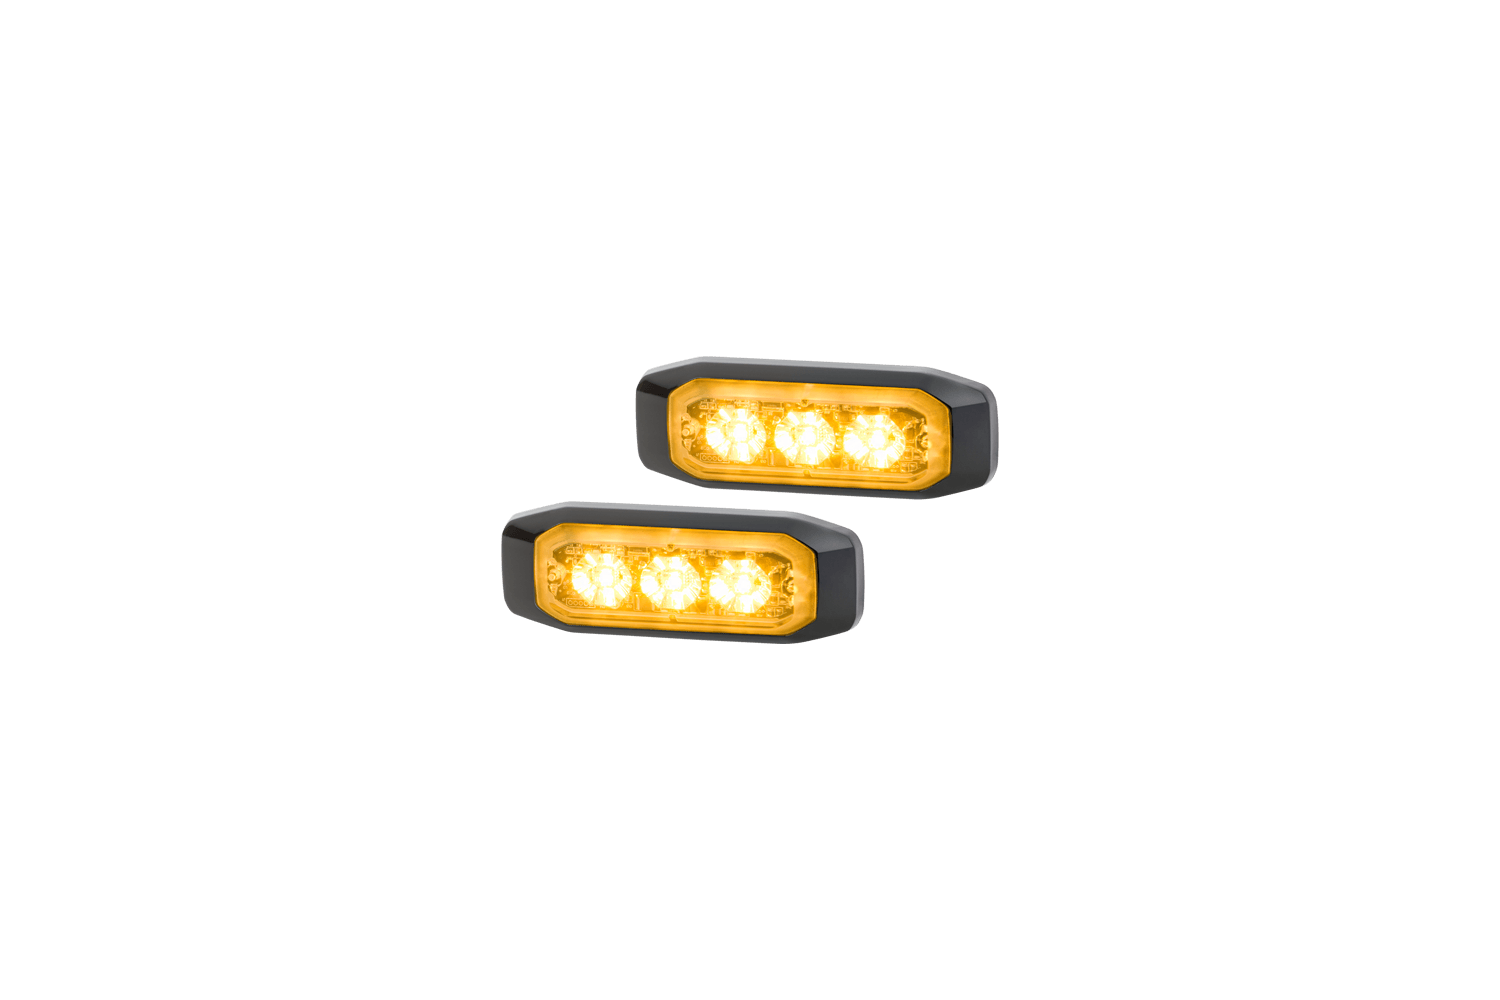 BST-Slim/BST-V-Slim warning lamp from Hella offered by Patlon